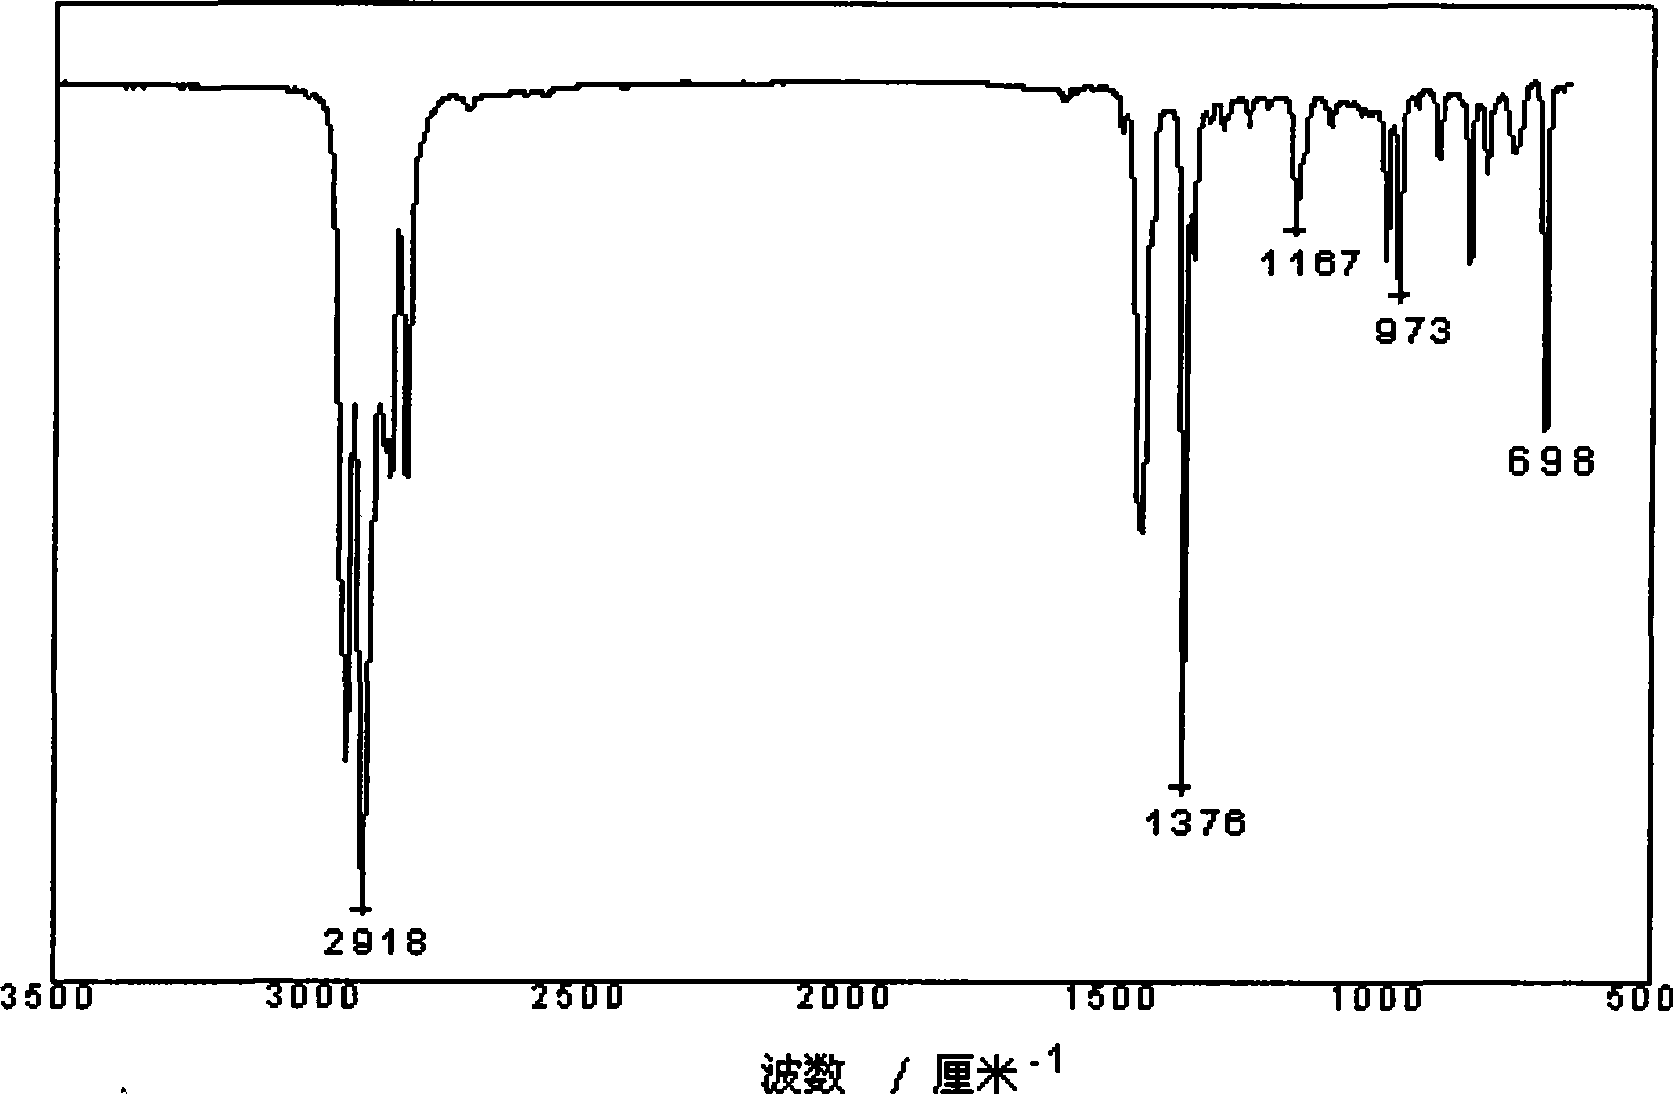 Method for preparing polymer in situ alloy by alkene monomer polymerization initiated by plasma surface